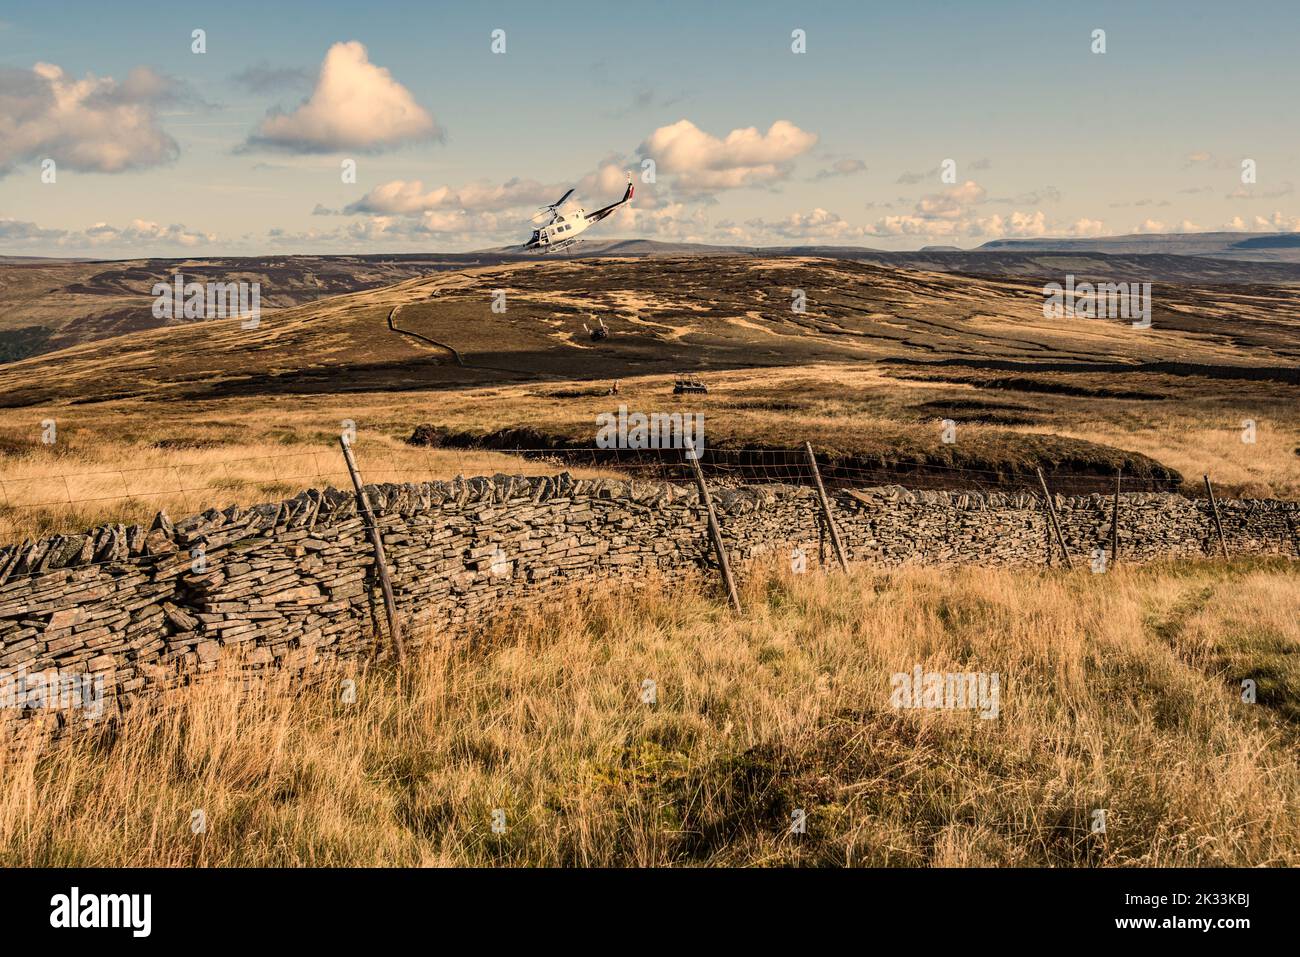 Heli-lift Services helicopter G-BIGB involved in peatland restoration work  at Fountains Fell in the Yorkshire Dales National Park 23rd September 2022 Stock Photo